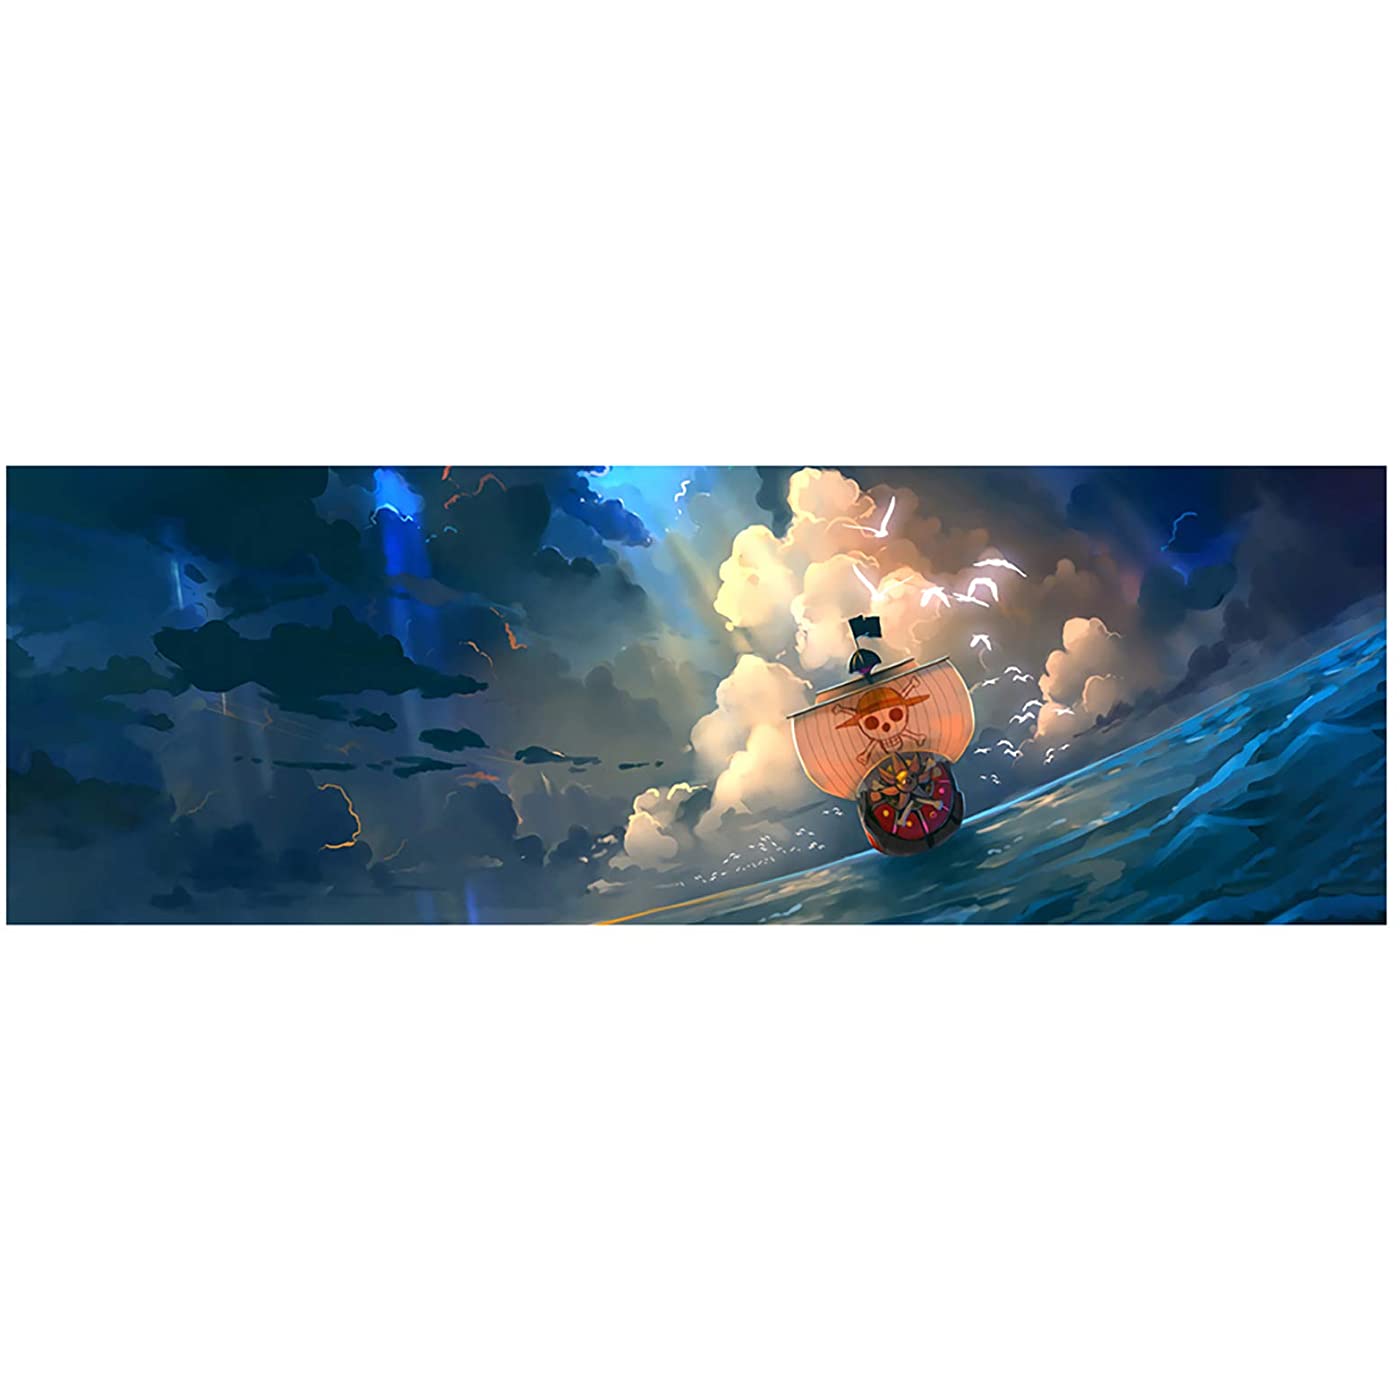 $11 Mo Anime One Piece Poster Thousand Sunny Print On Canvas The Straw Hat Pirates Wall Picture For Living Room Decor Wall Art (Unframed, 24x72inch)